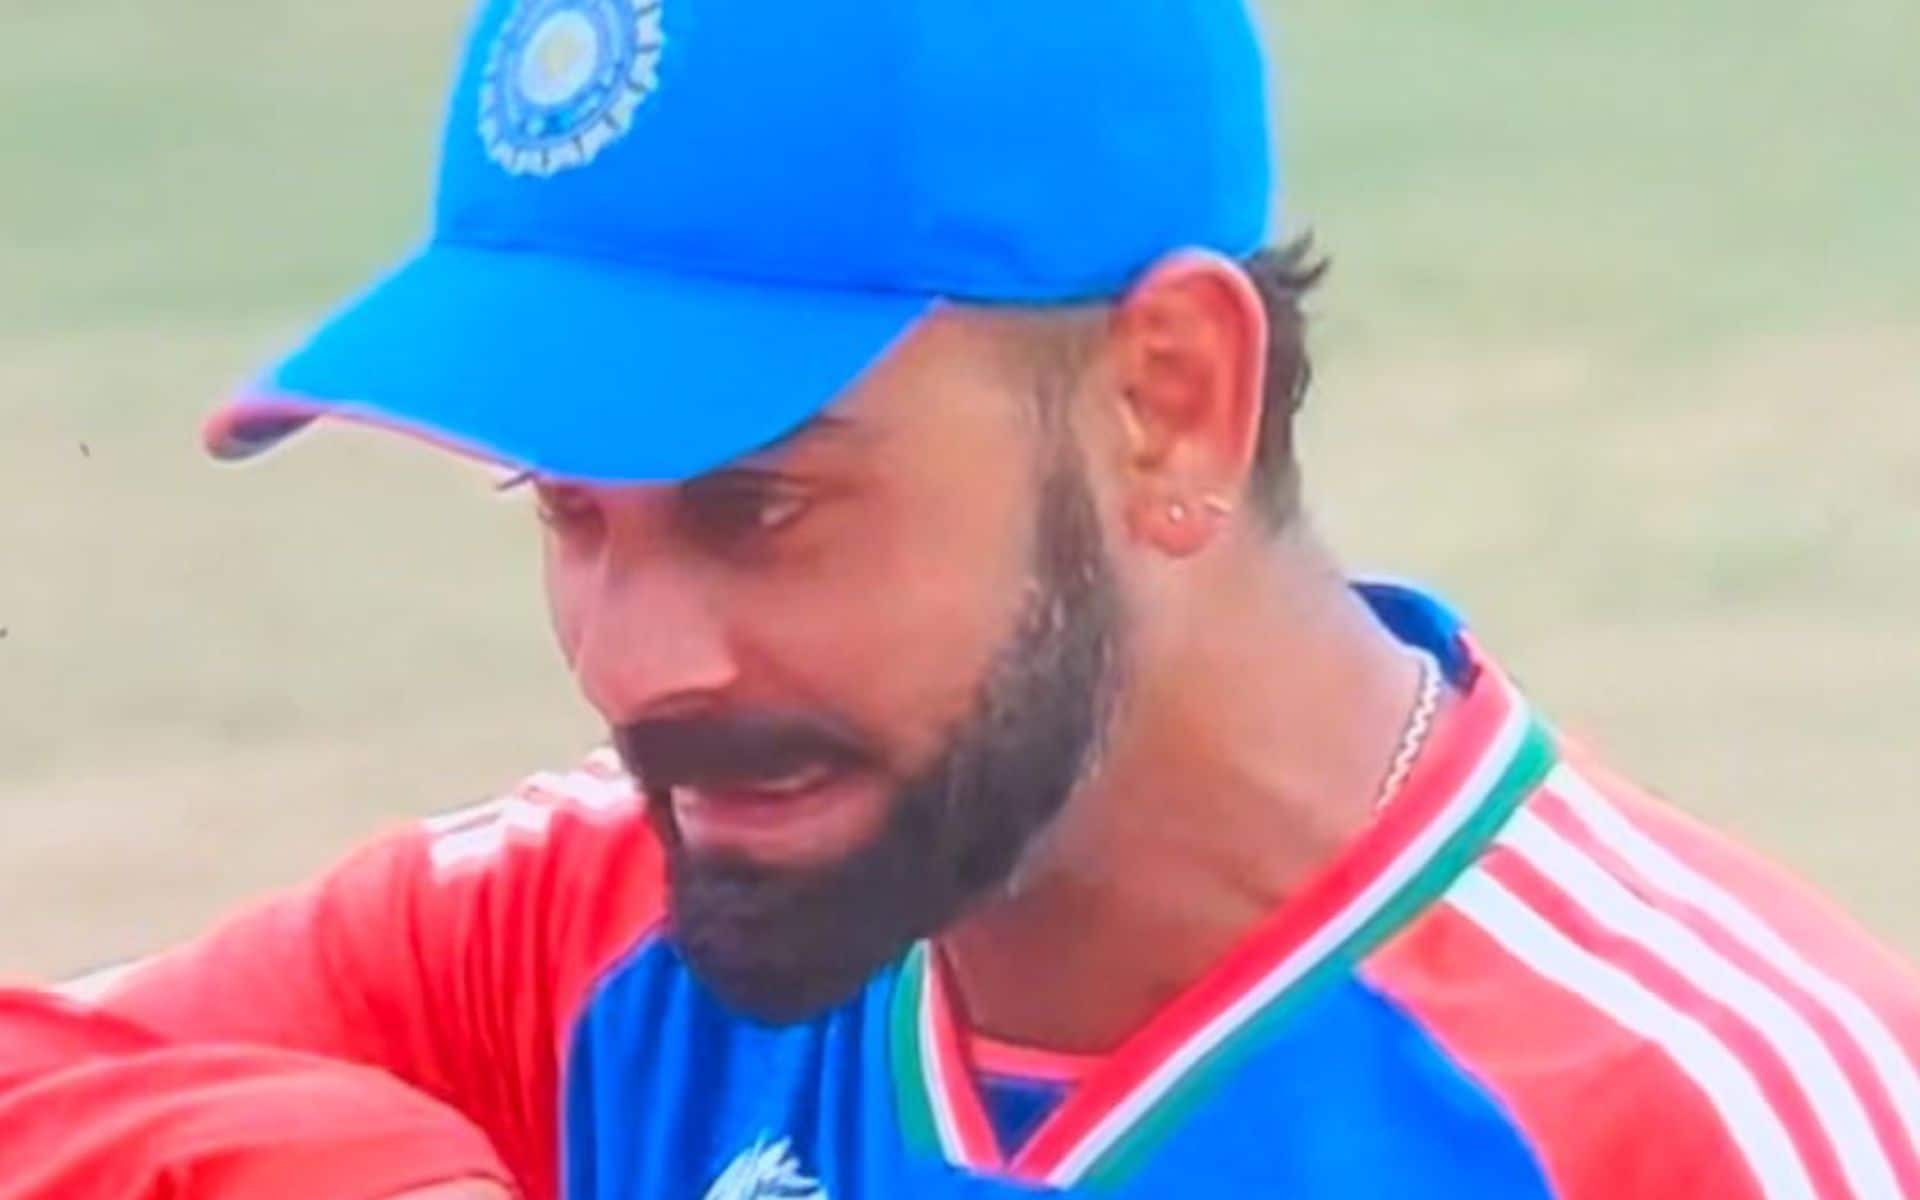  Virat Kohli Gets Emotional After India Win T20 World Cup After 17 Years; Check Viral Picture